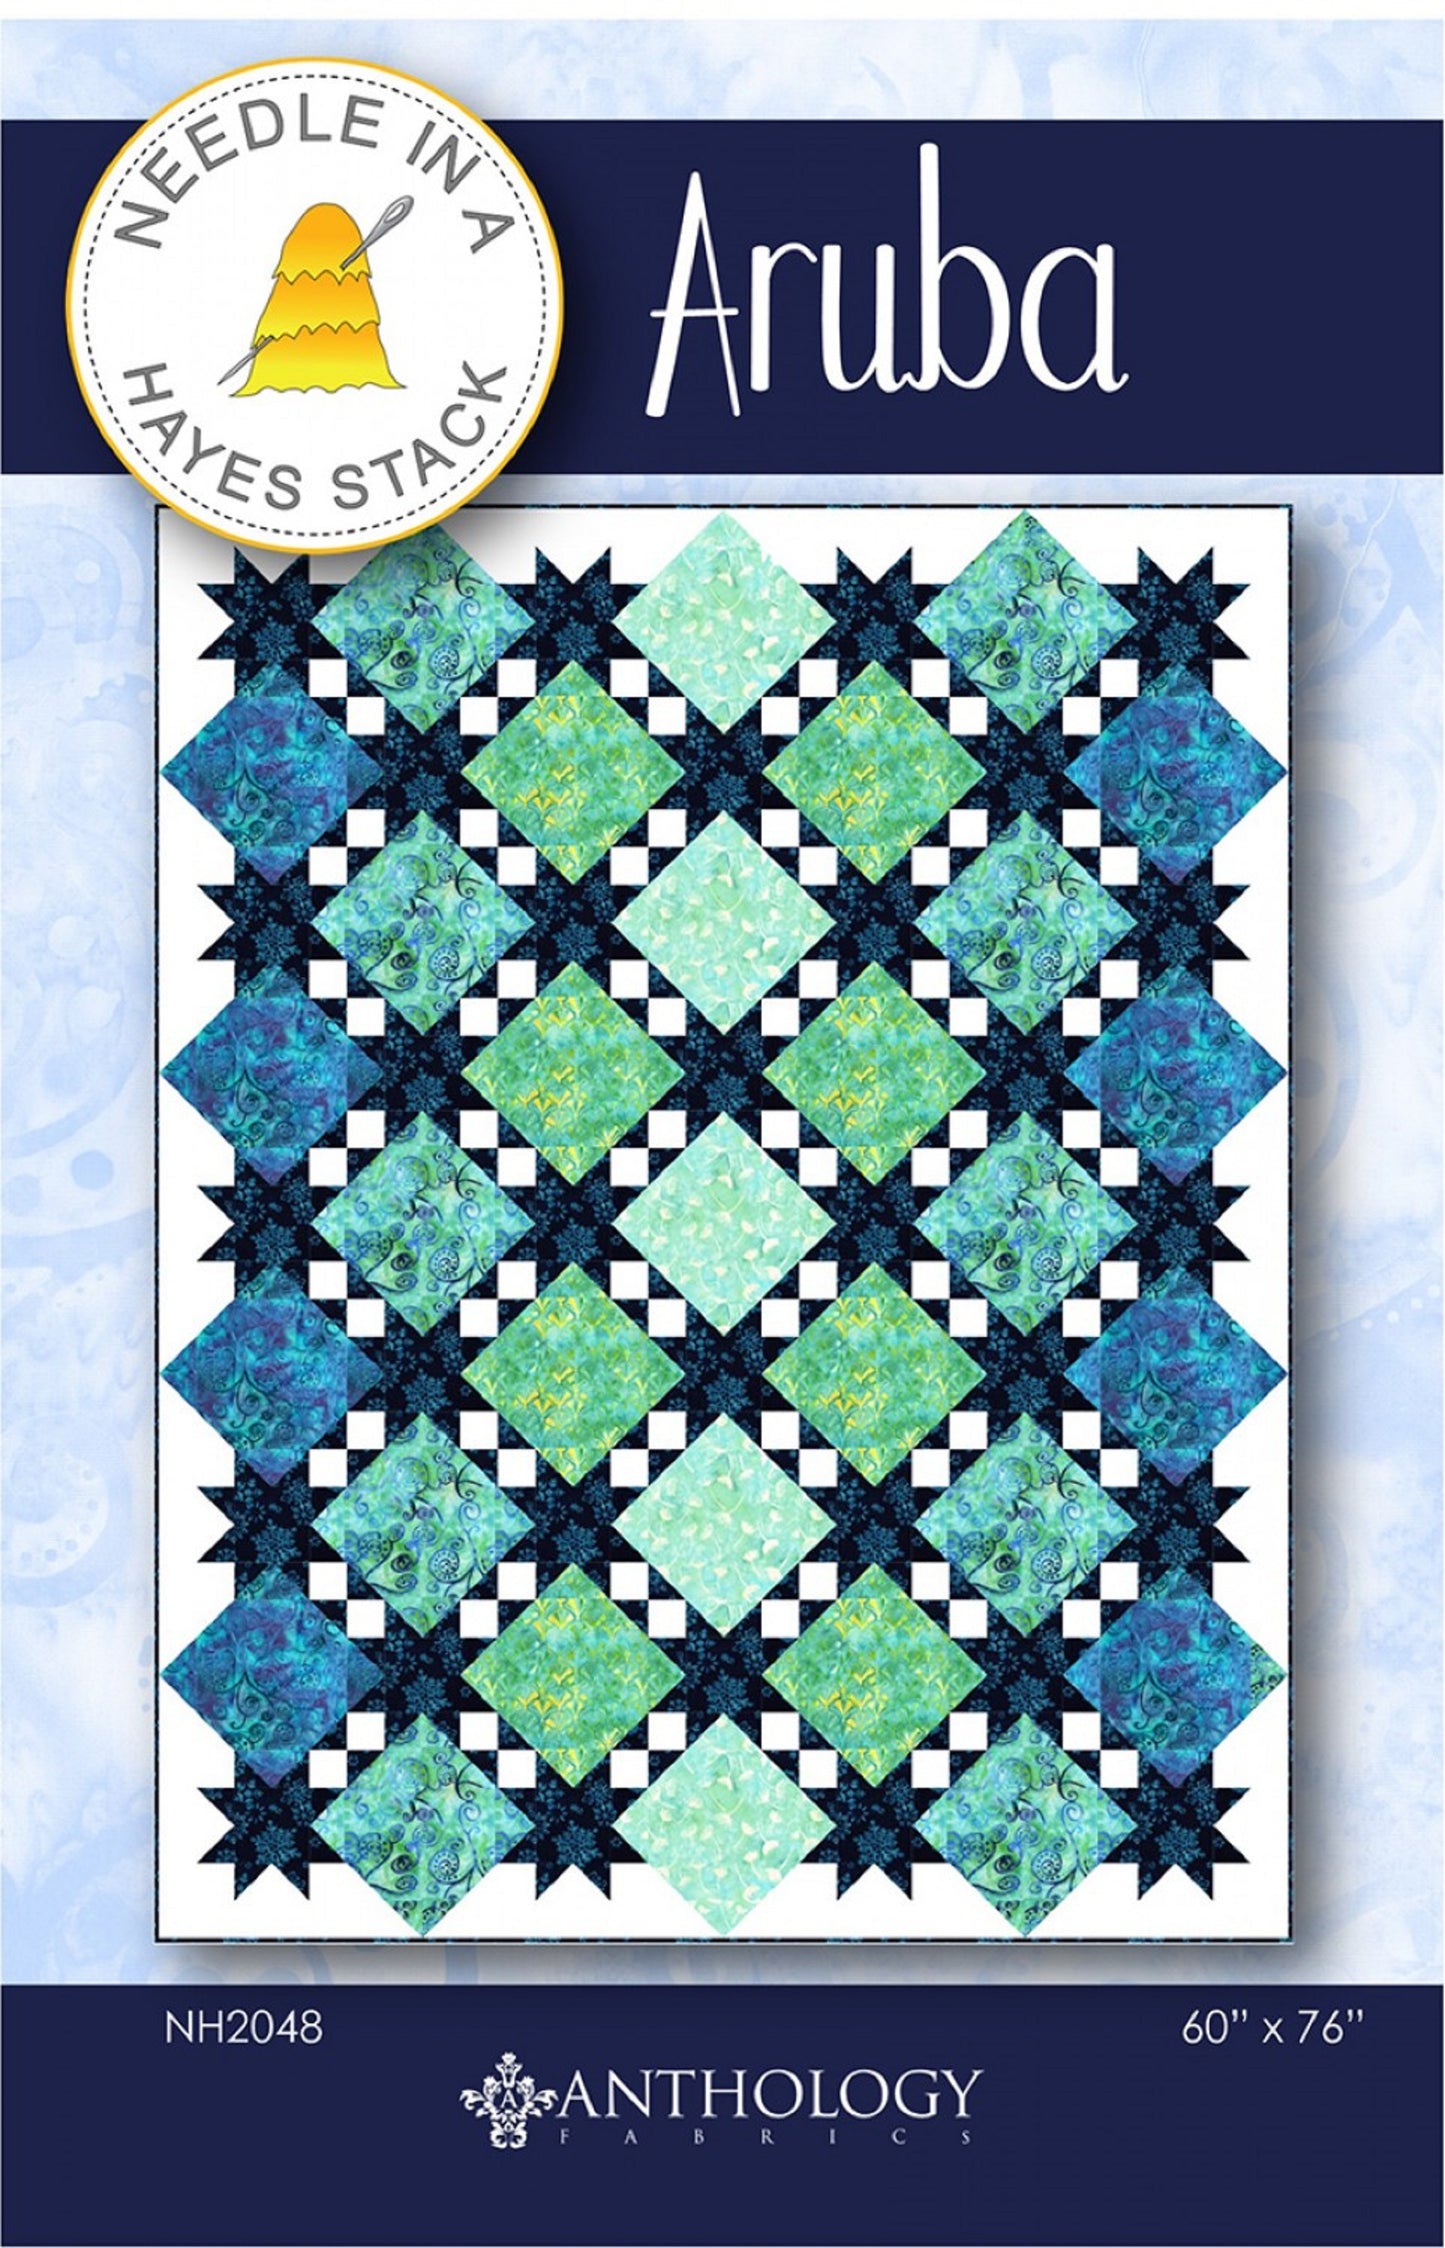 Aruba Quilt Pattern by Needle in a Hayes Stack